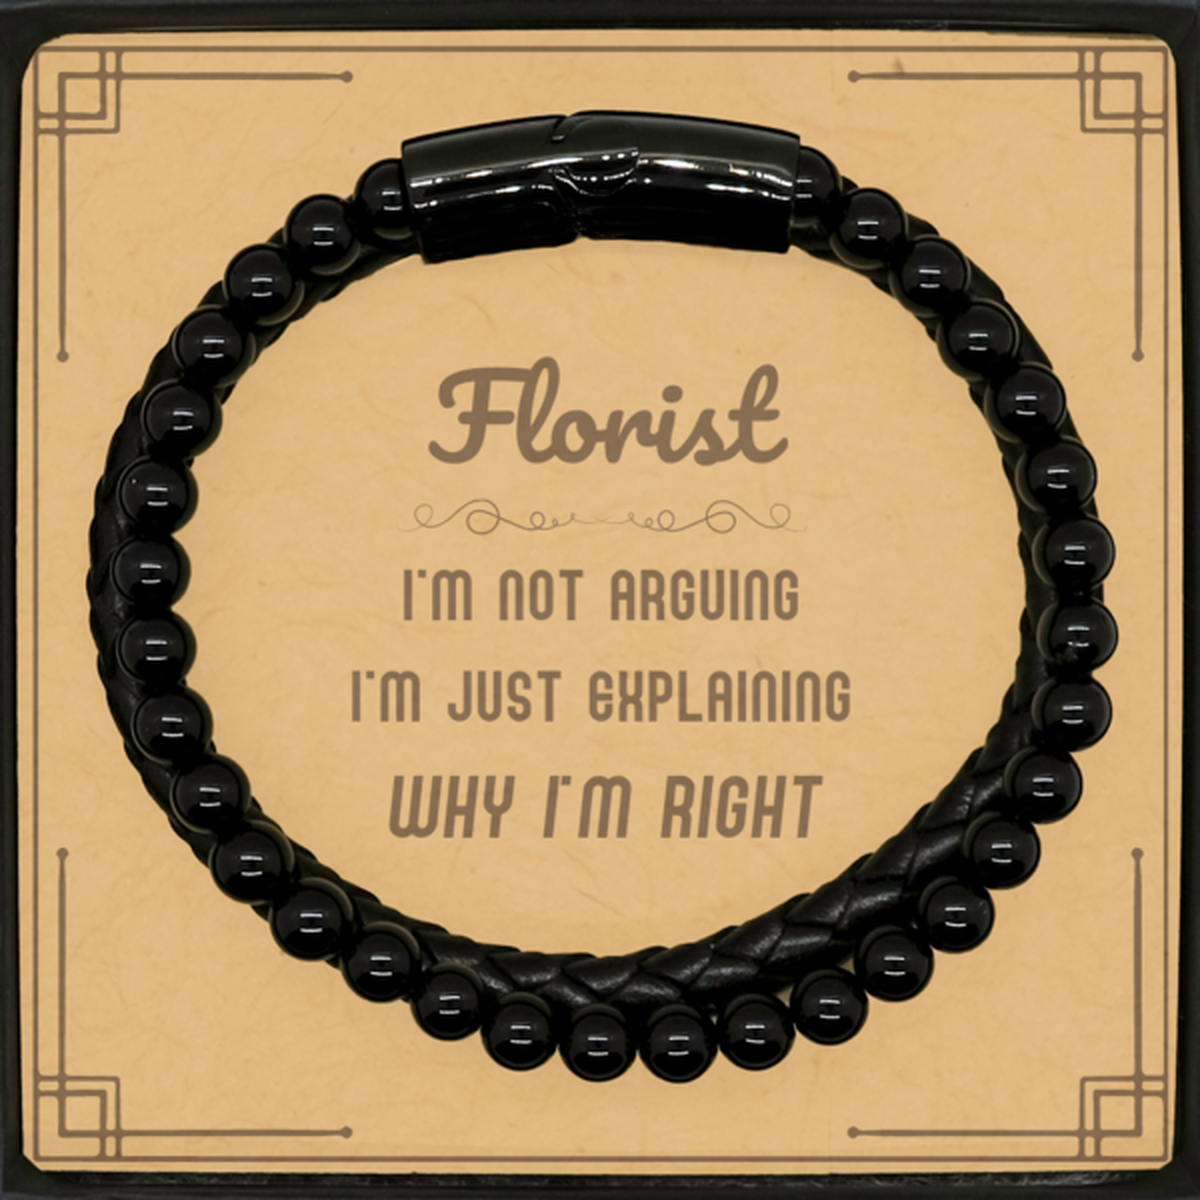 Florist I'm not Arguing. I'm Just Explaining Why I'm RIGHT Stone Leather Bracelets, Funny Saying Quote Florist Gifts For Florist Message Card Graduation Birthday Christmas Gifts for Men Women Coworker